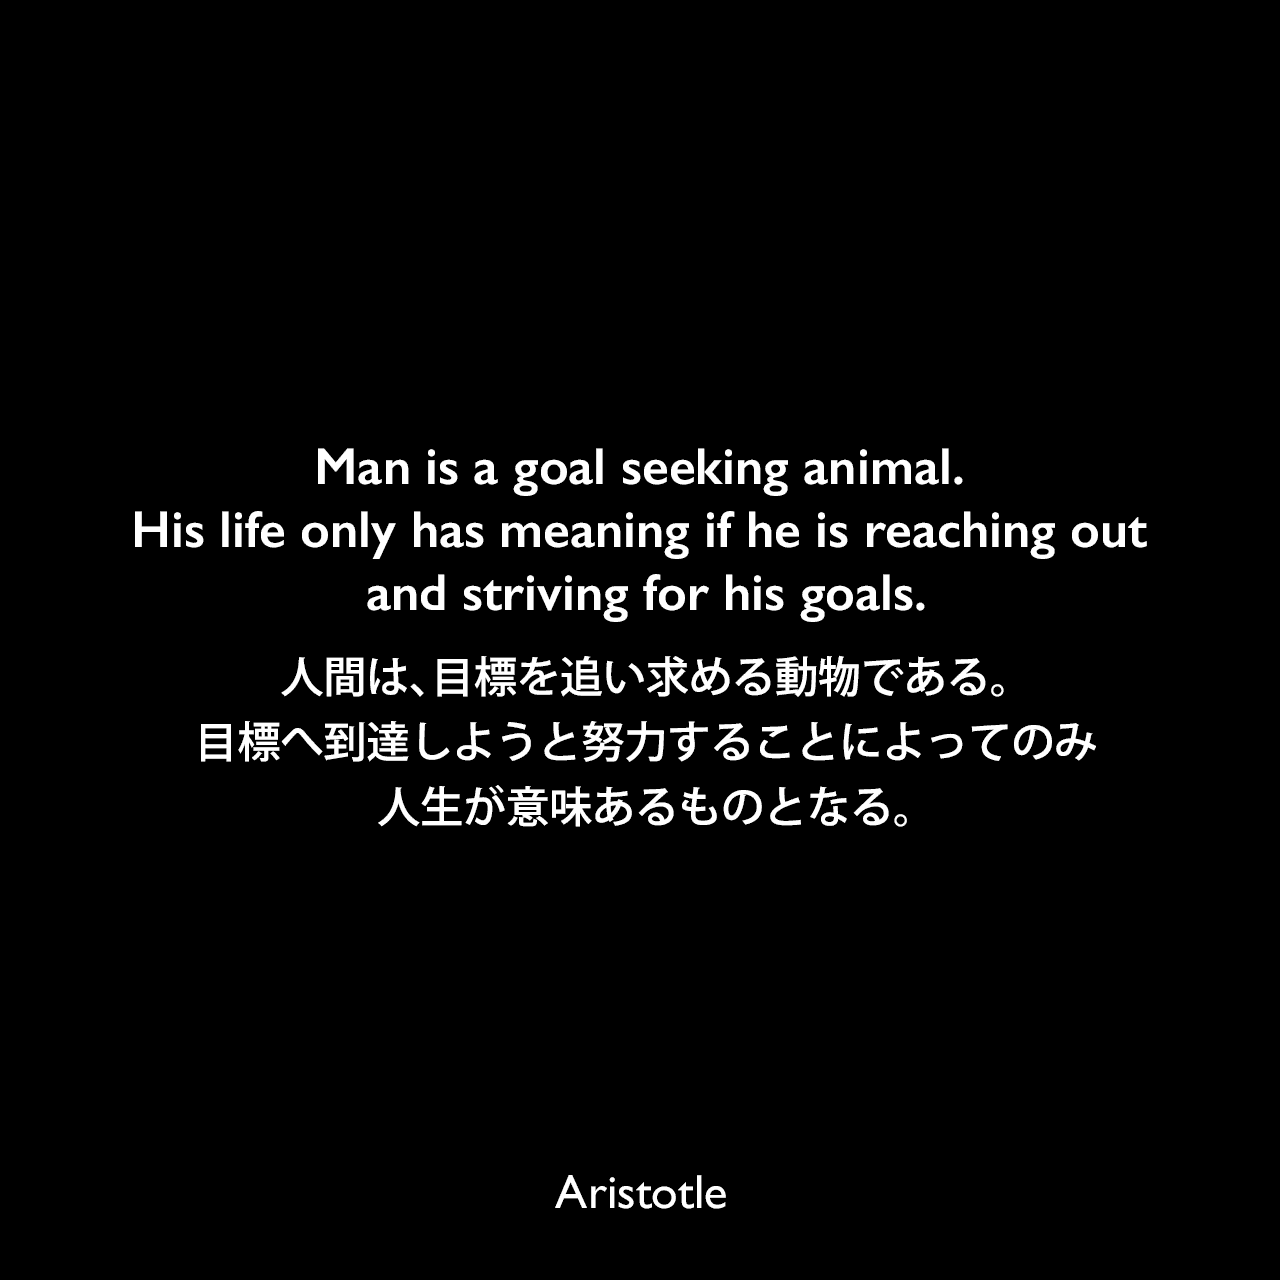 Man is a goal seeking animal. His life only has meaning if he is reaching out and striving for his goals.人間は、目標を追い求める動物である。目標へ到達しようと努力することによってのみ、人生が意味あるものとなる。Aristotle